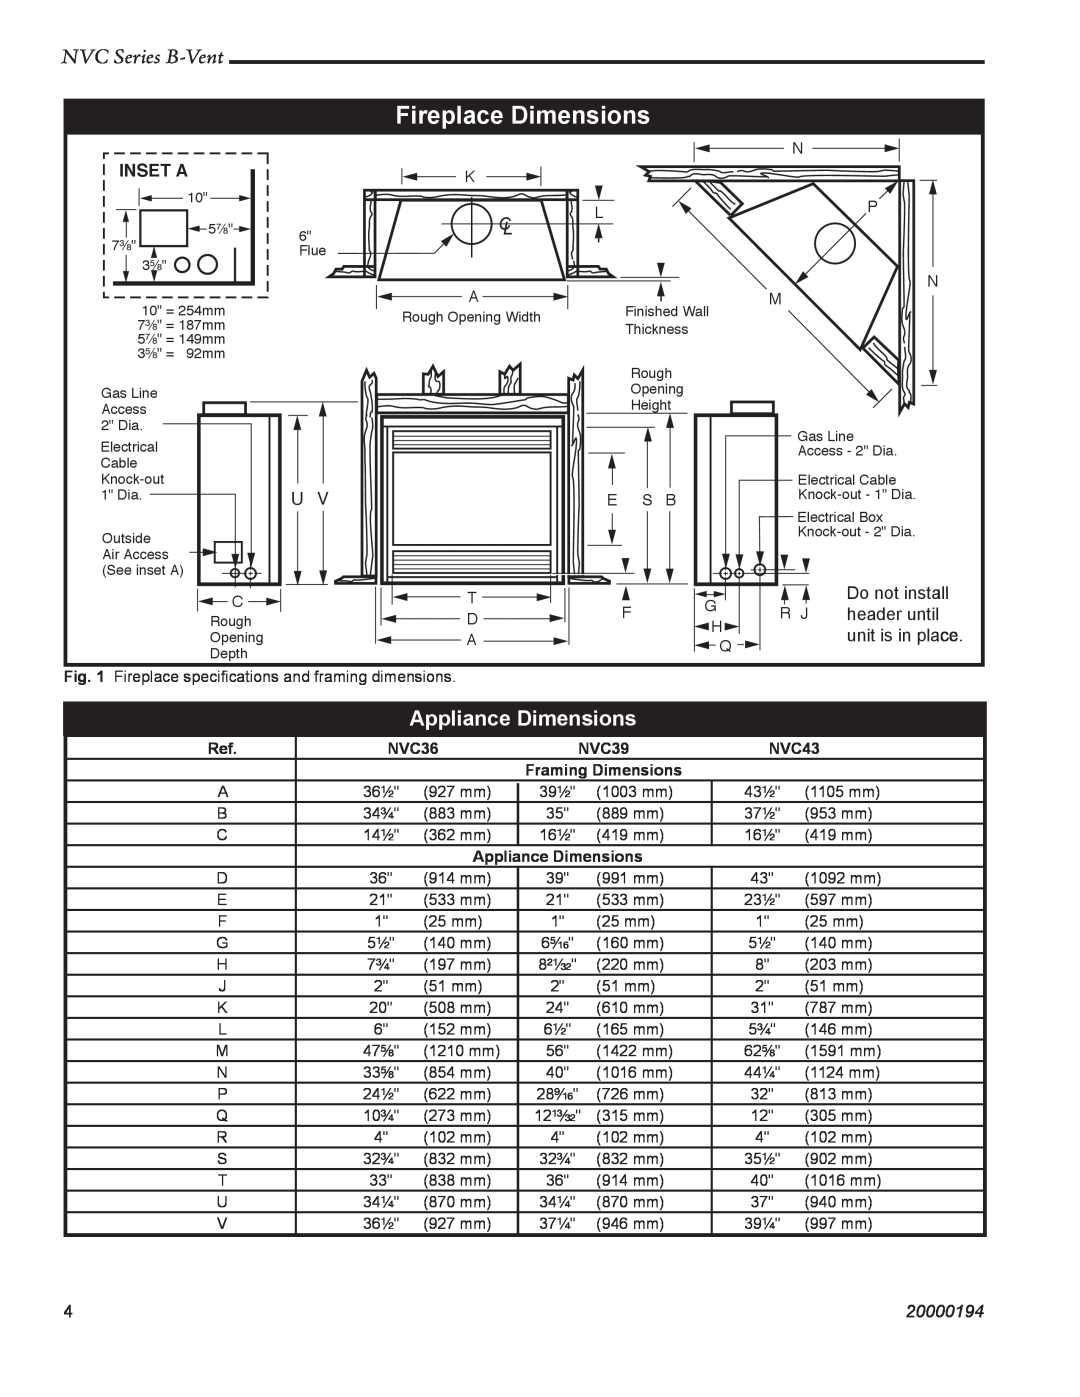 Vermont Casting NVC43, NVC36, NVC39 warranty Fireplace Dimensions, Appliance Dimensions, NVC Series B-Vent, Inset A, 20000194 